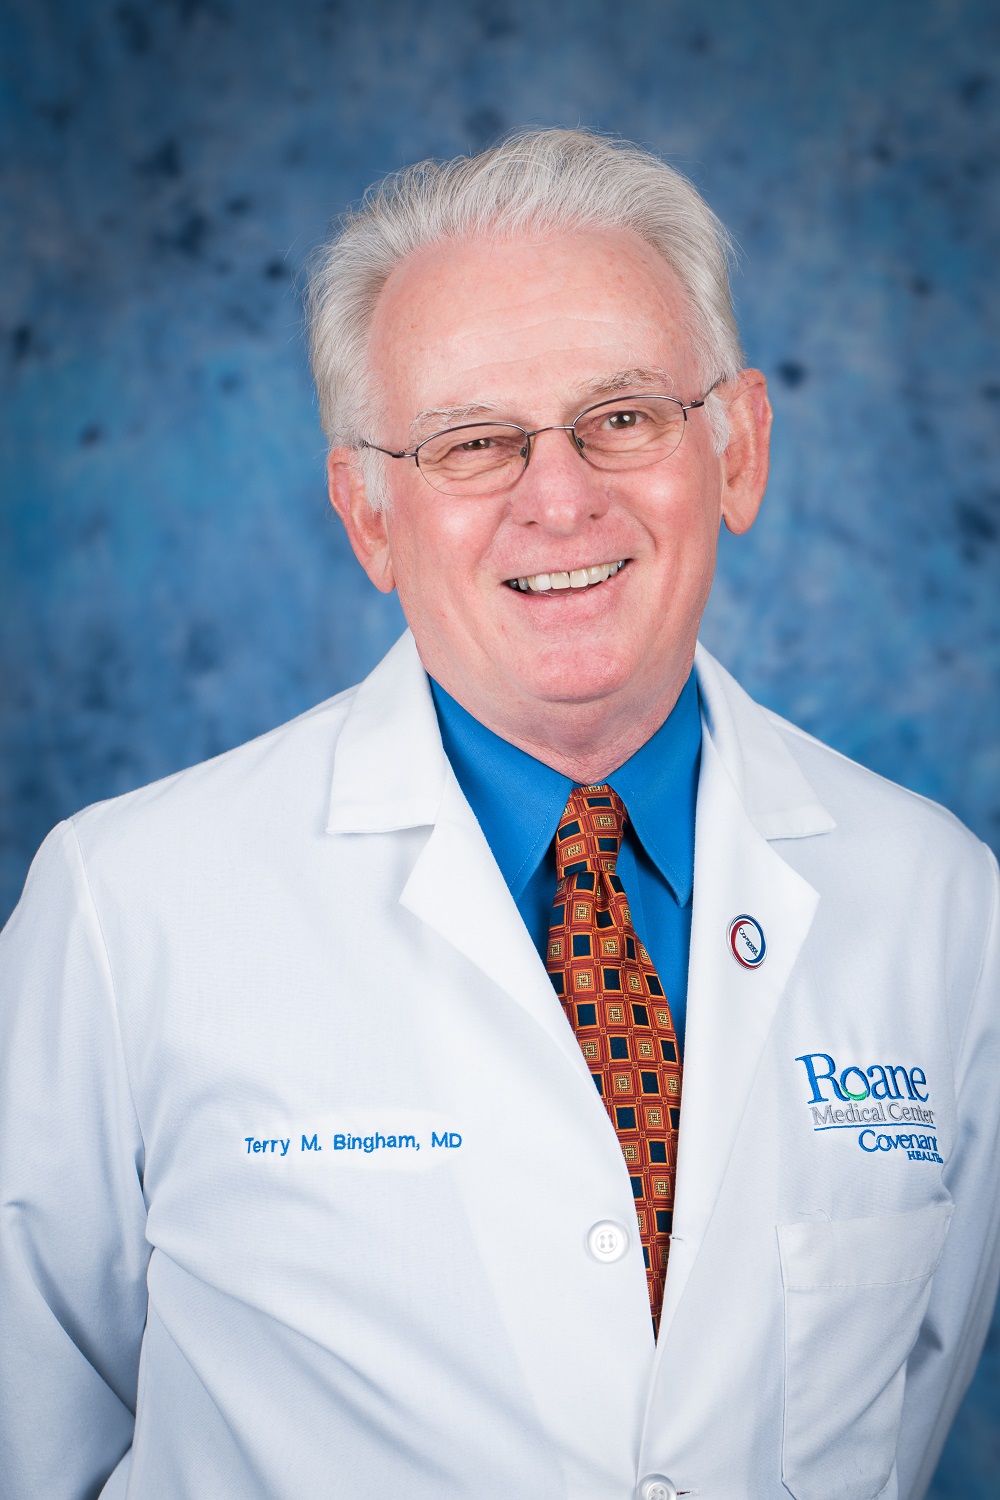 Terry M. Bingham, MD of Roane Surgical Group